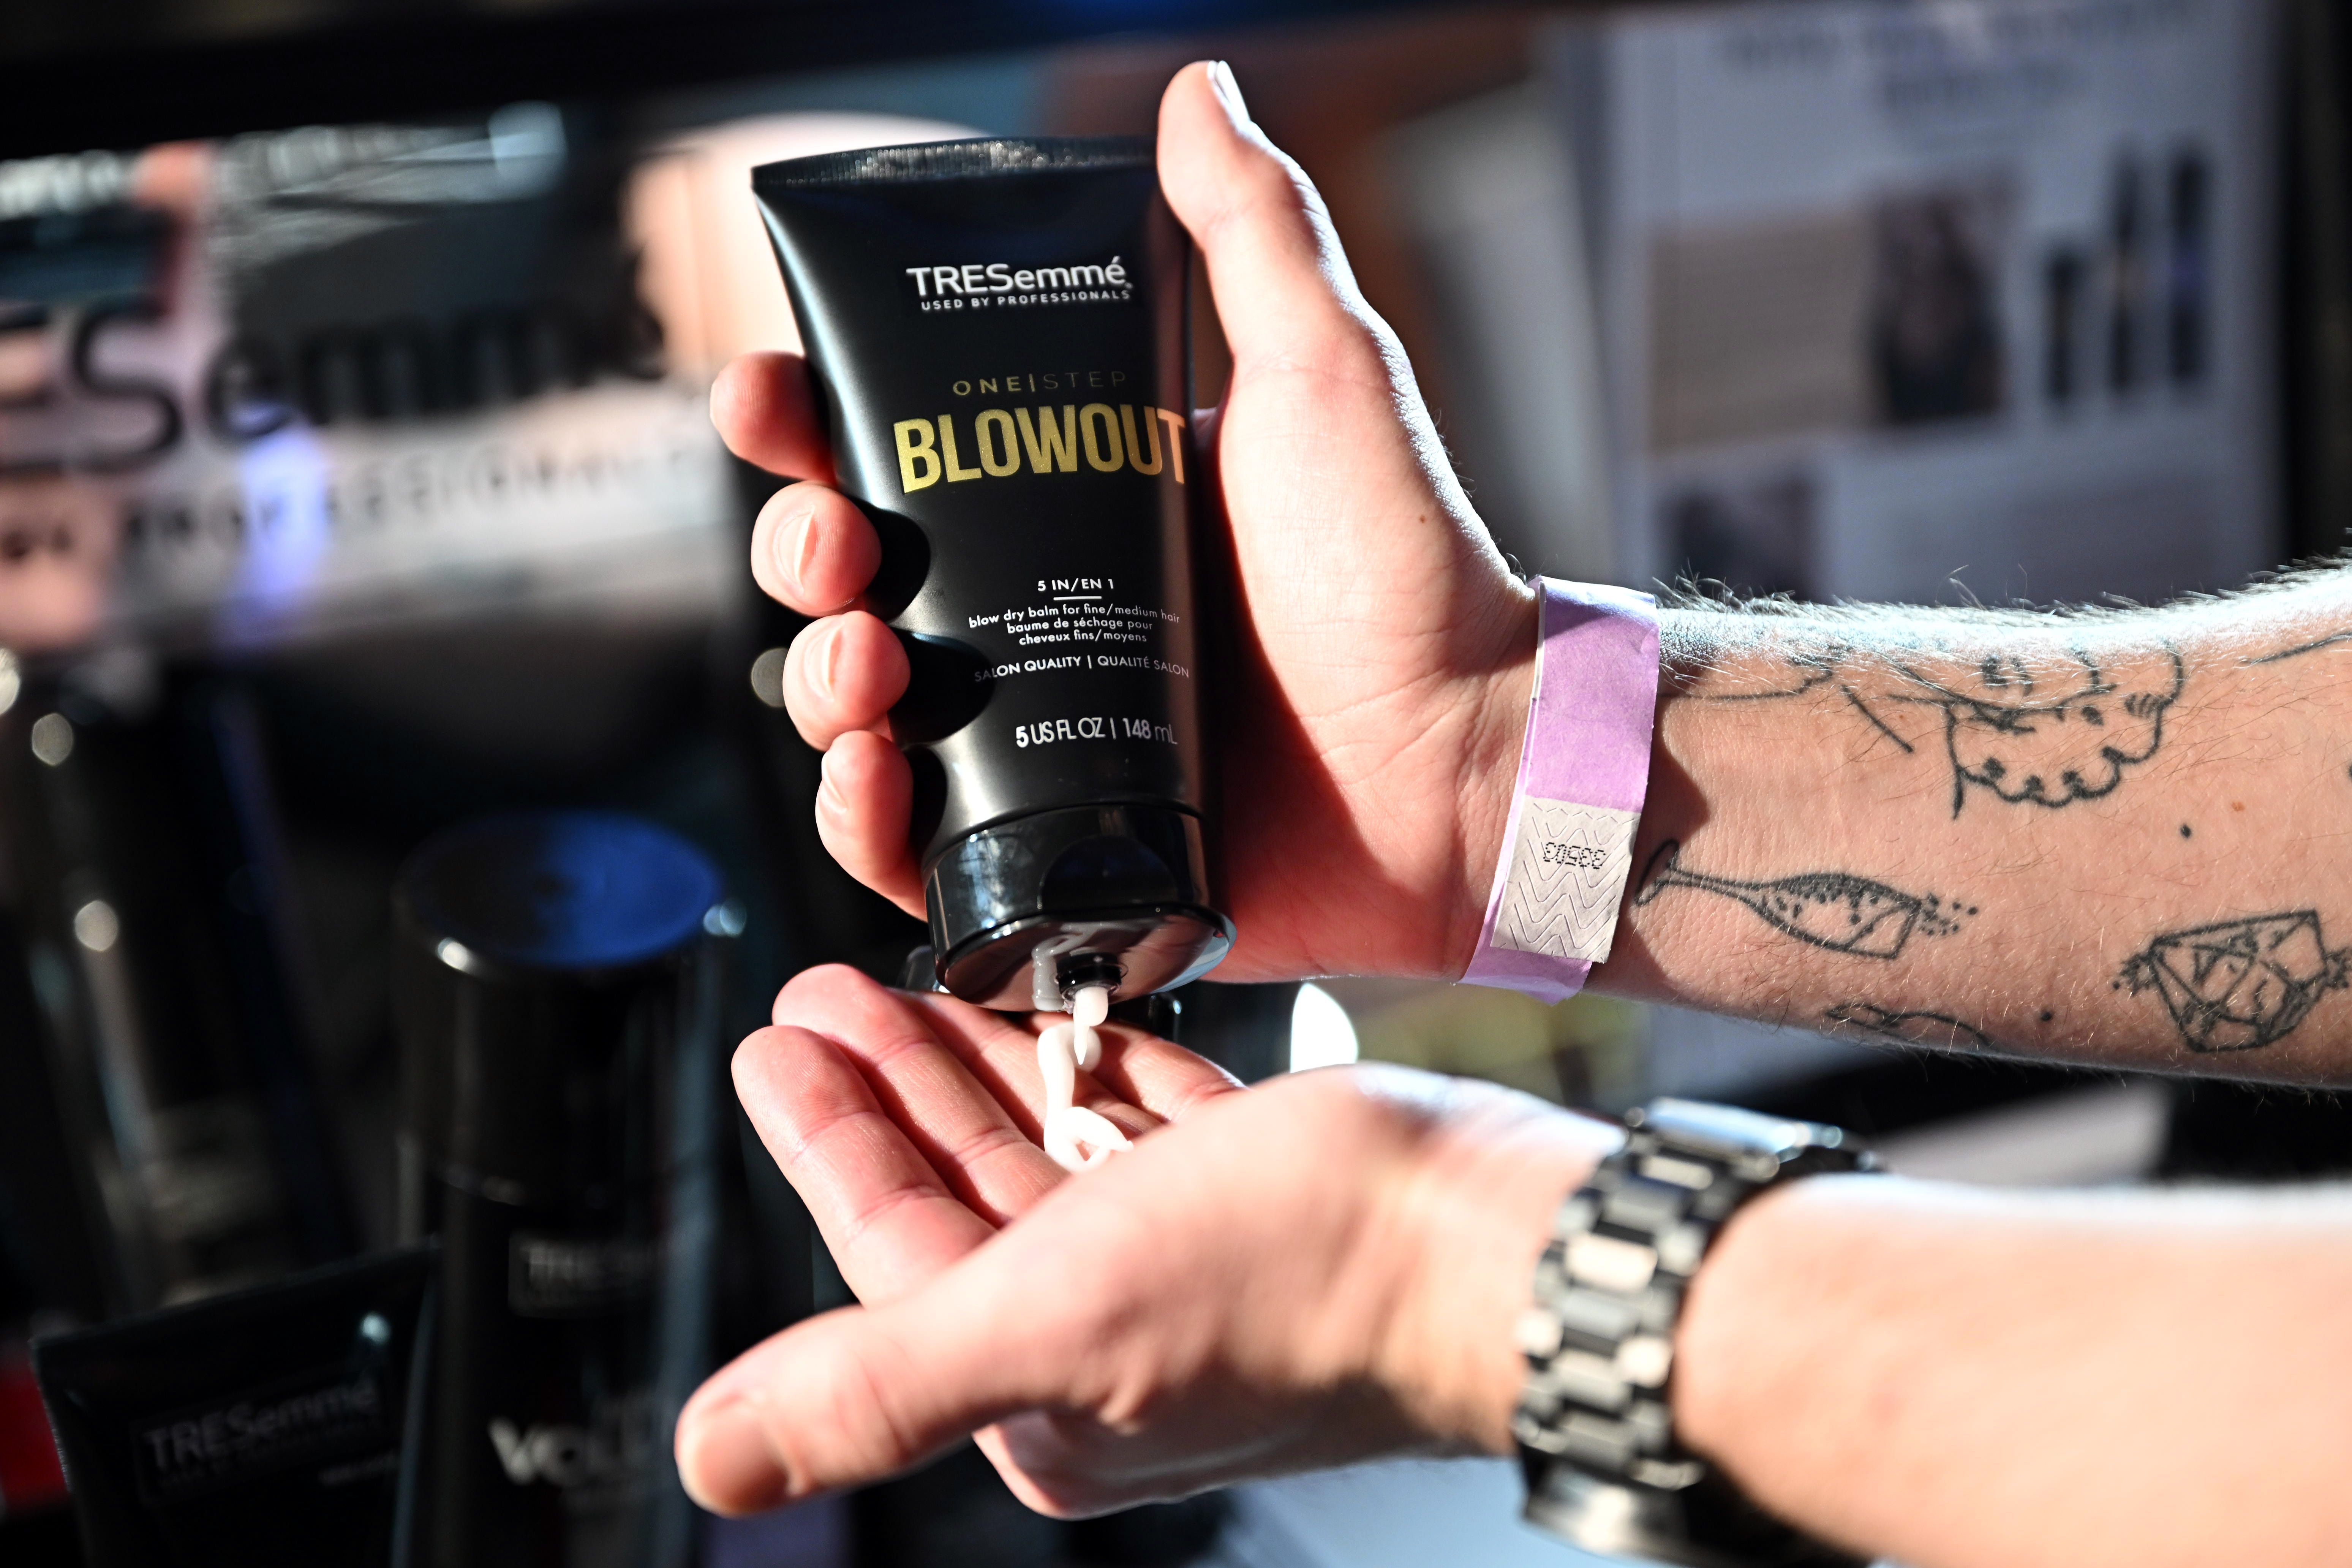 Stylist pouring TRESemmé Blowout balm from bottle into their hand